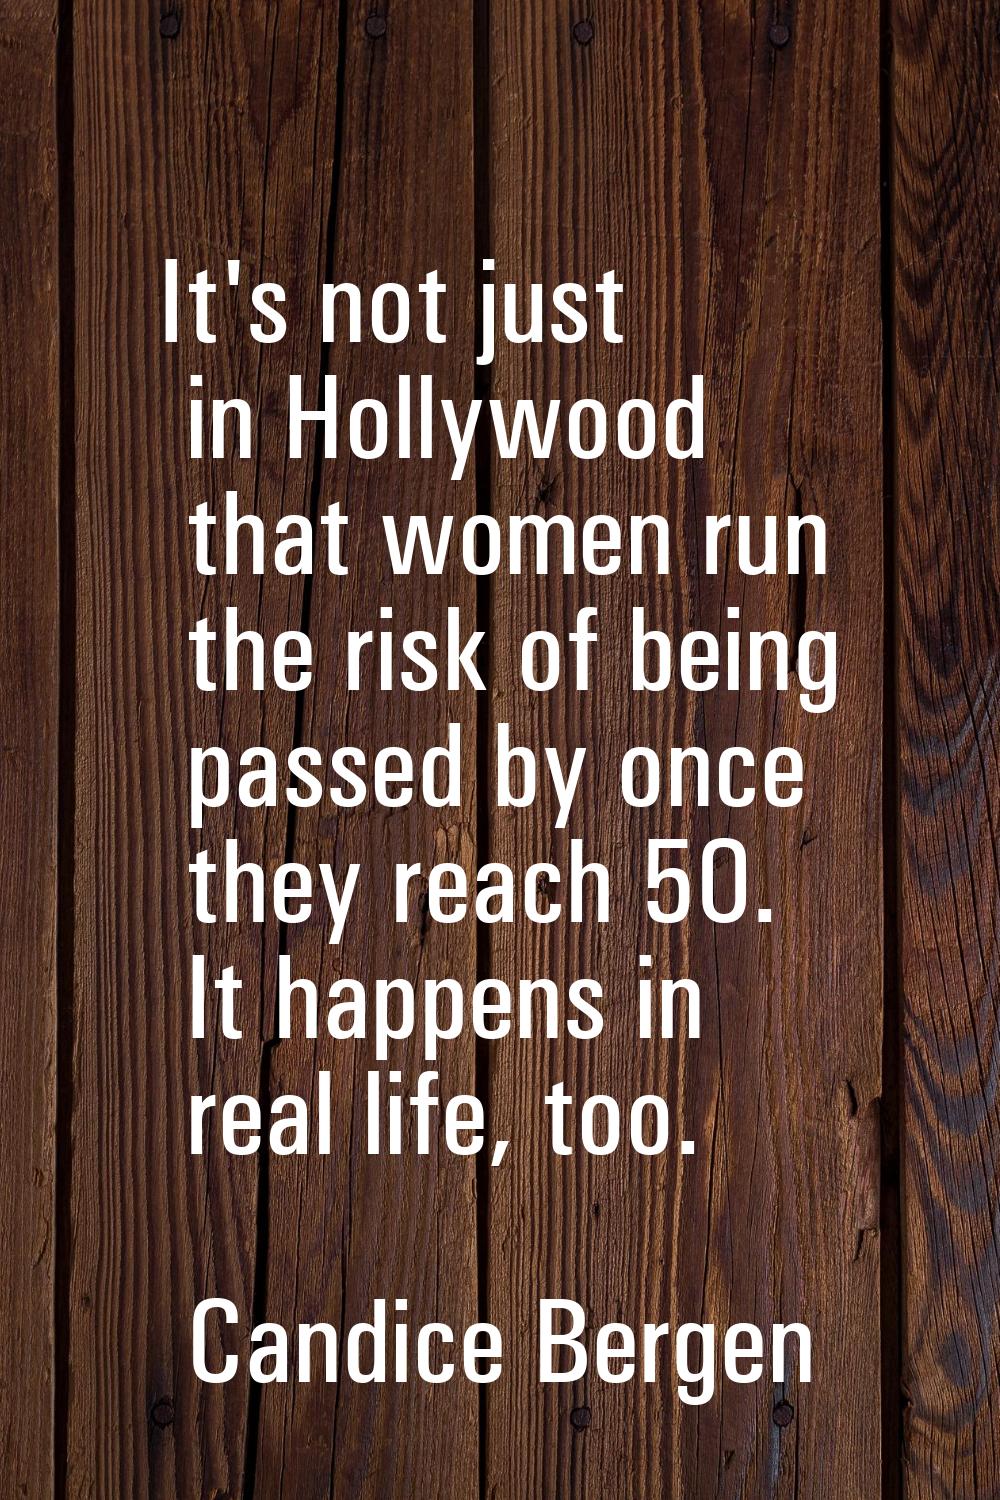 It's not just in Hollywood that women run the risk of being passed by once they reach 50. It happen